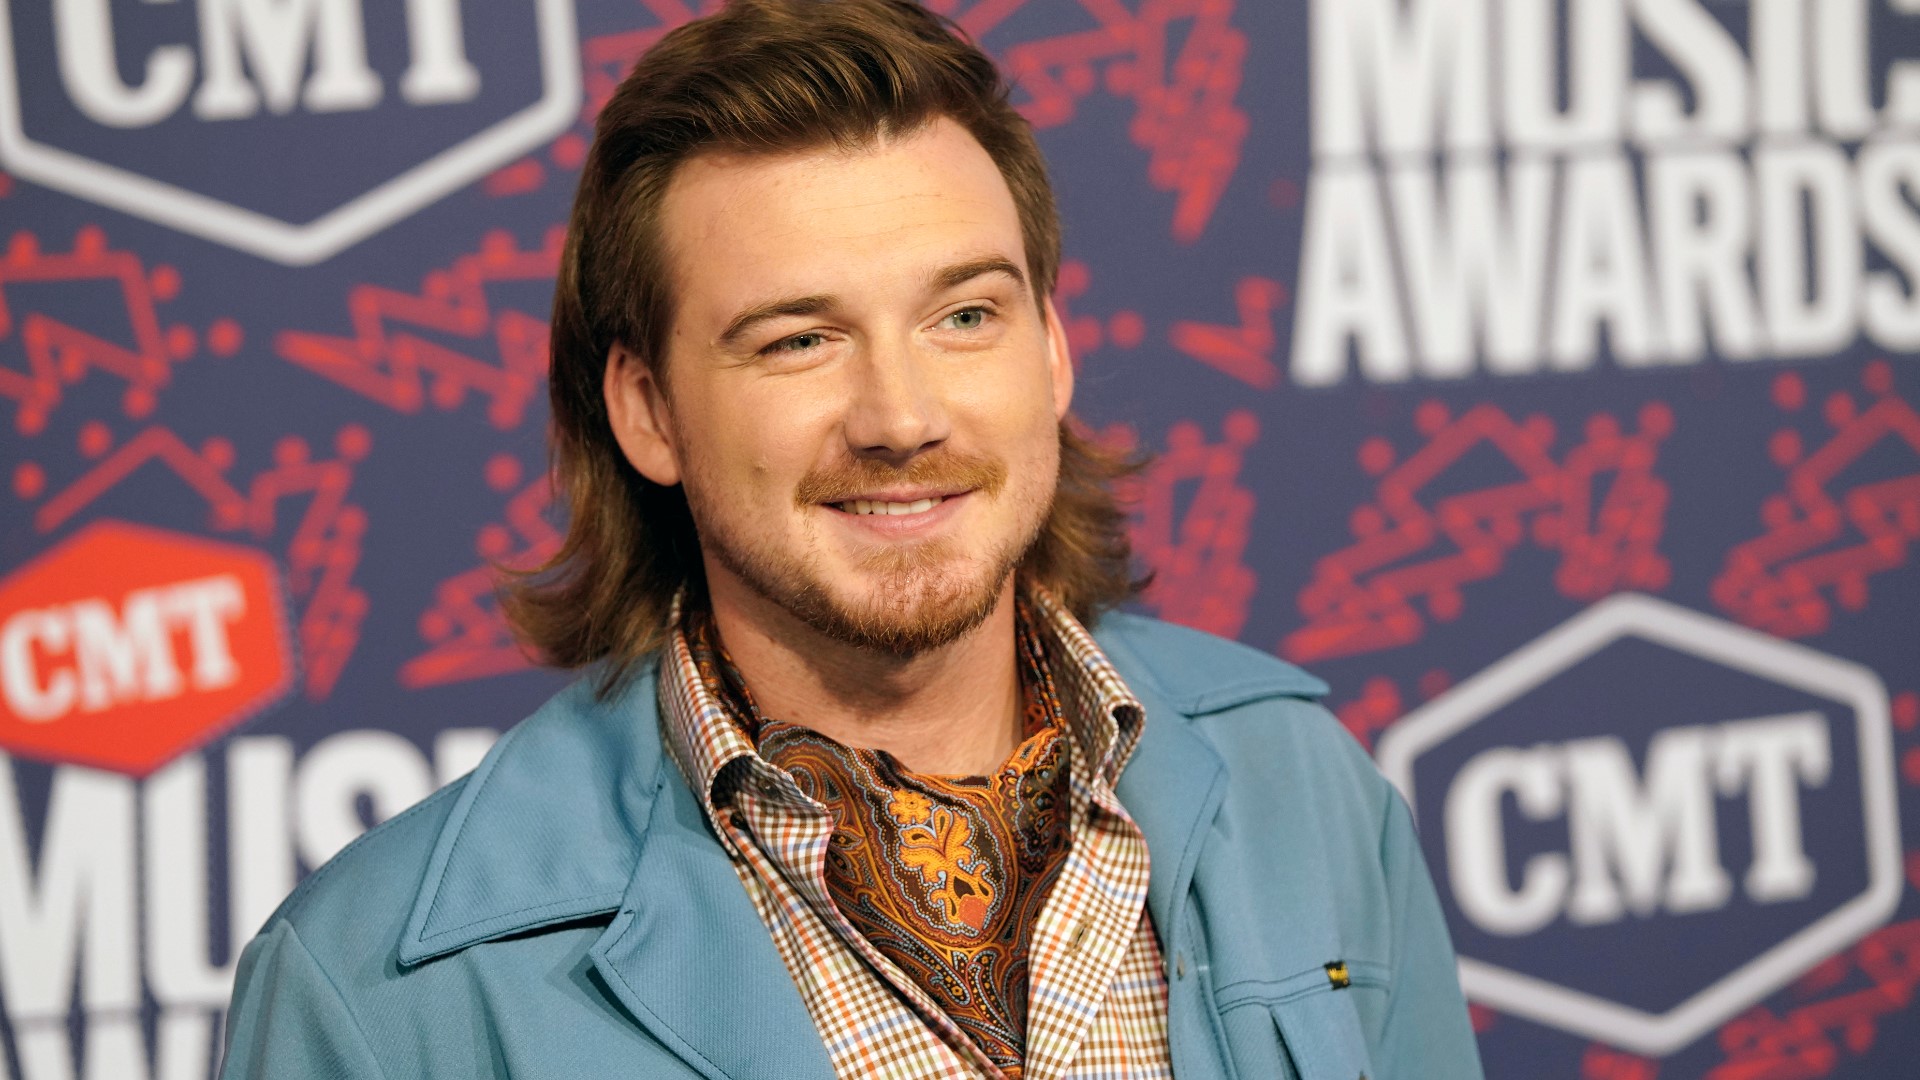 Nashville police confirmed Morgan Wallen was arrested for throwing a chair off the roof of a 6-story bar.